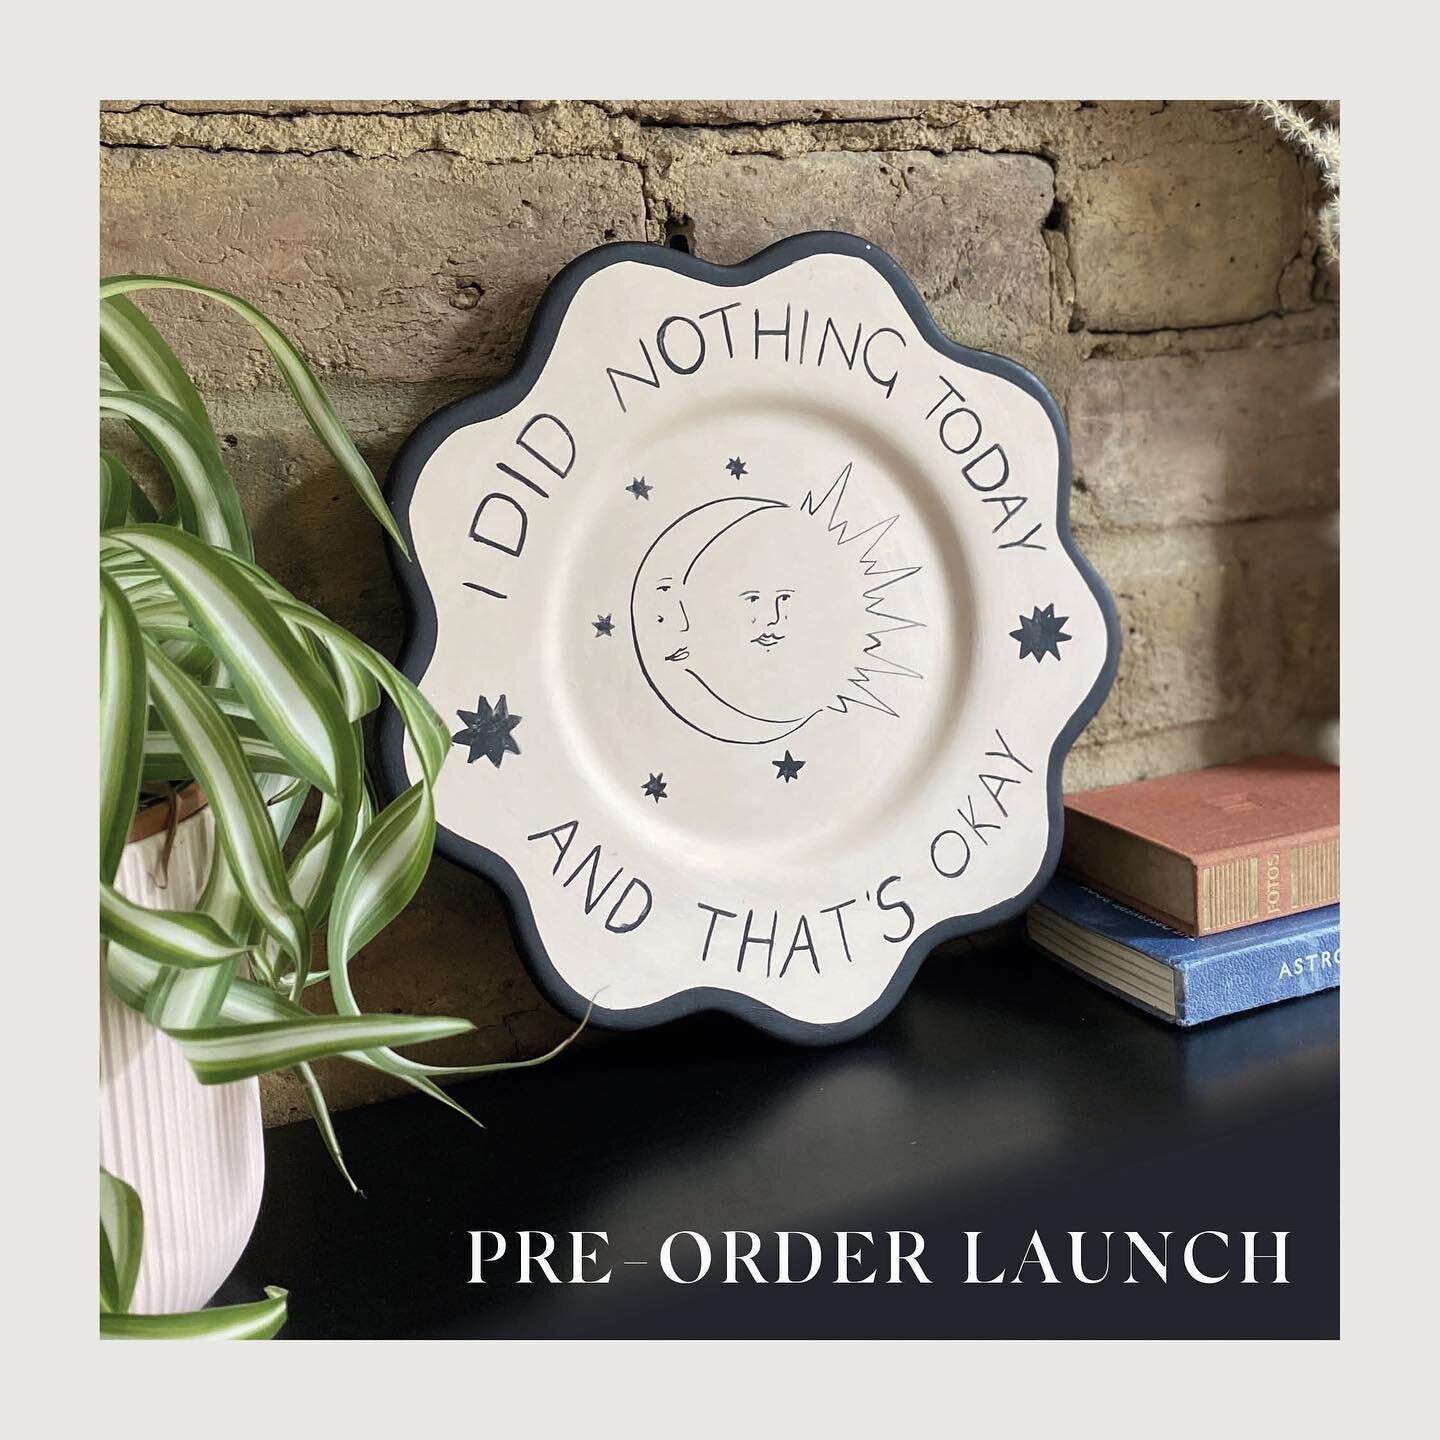 Guess who&rsquo;s back 👀 

I have had so many requests for my hand-painted ceramic plates and so I am bringing back a limited quantity!

I have a small number available which I will be releasing as a pre-order. There will be 2 designs and only a han